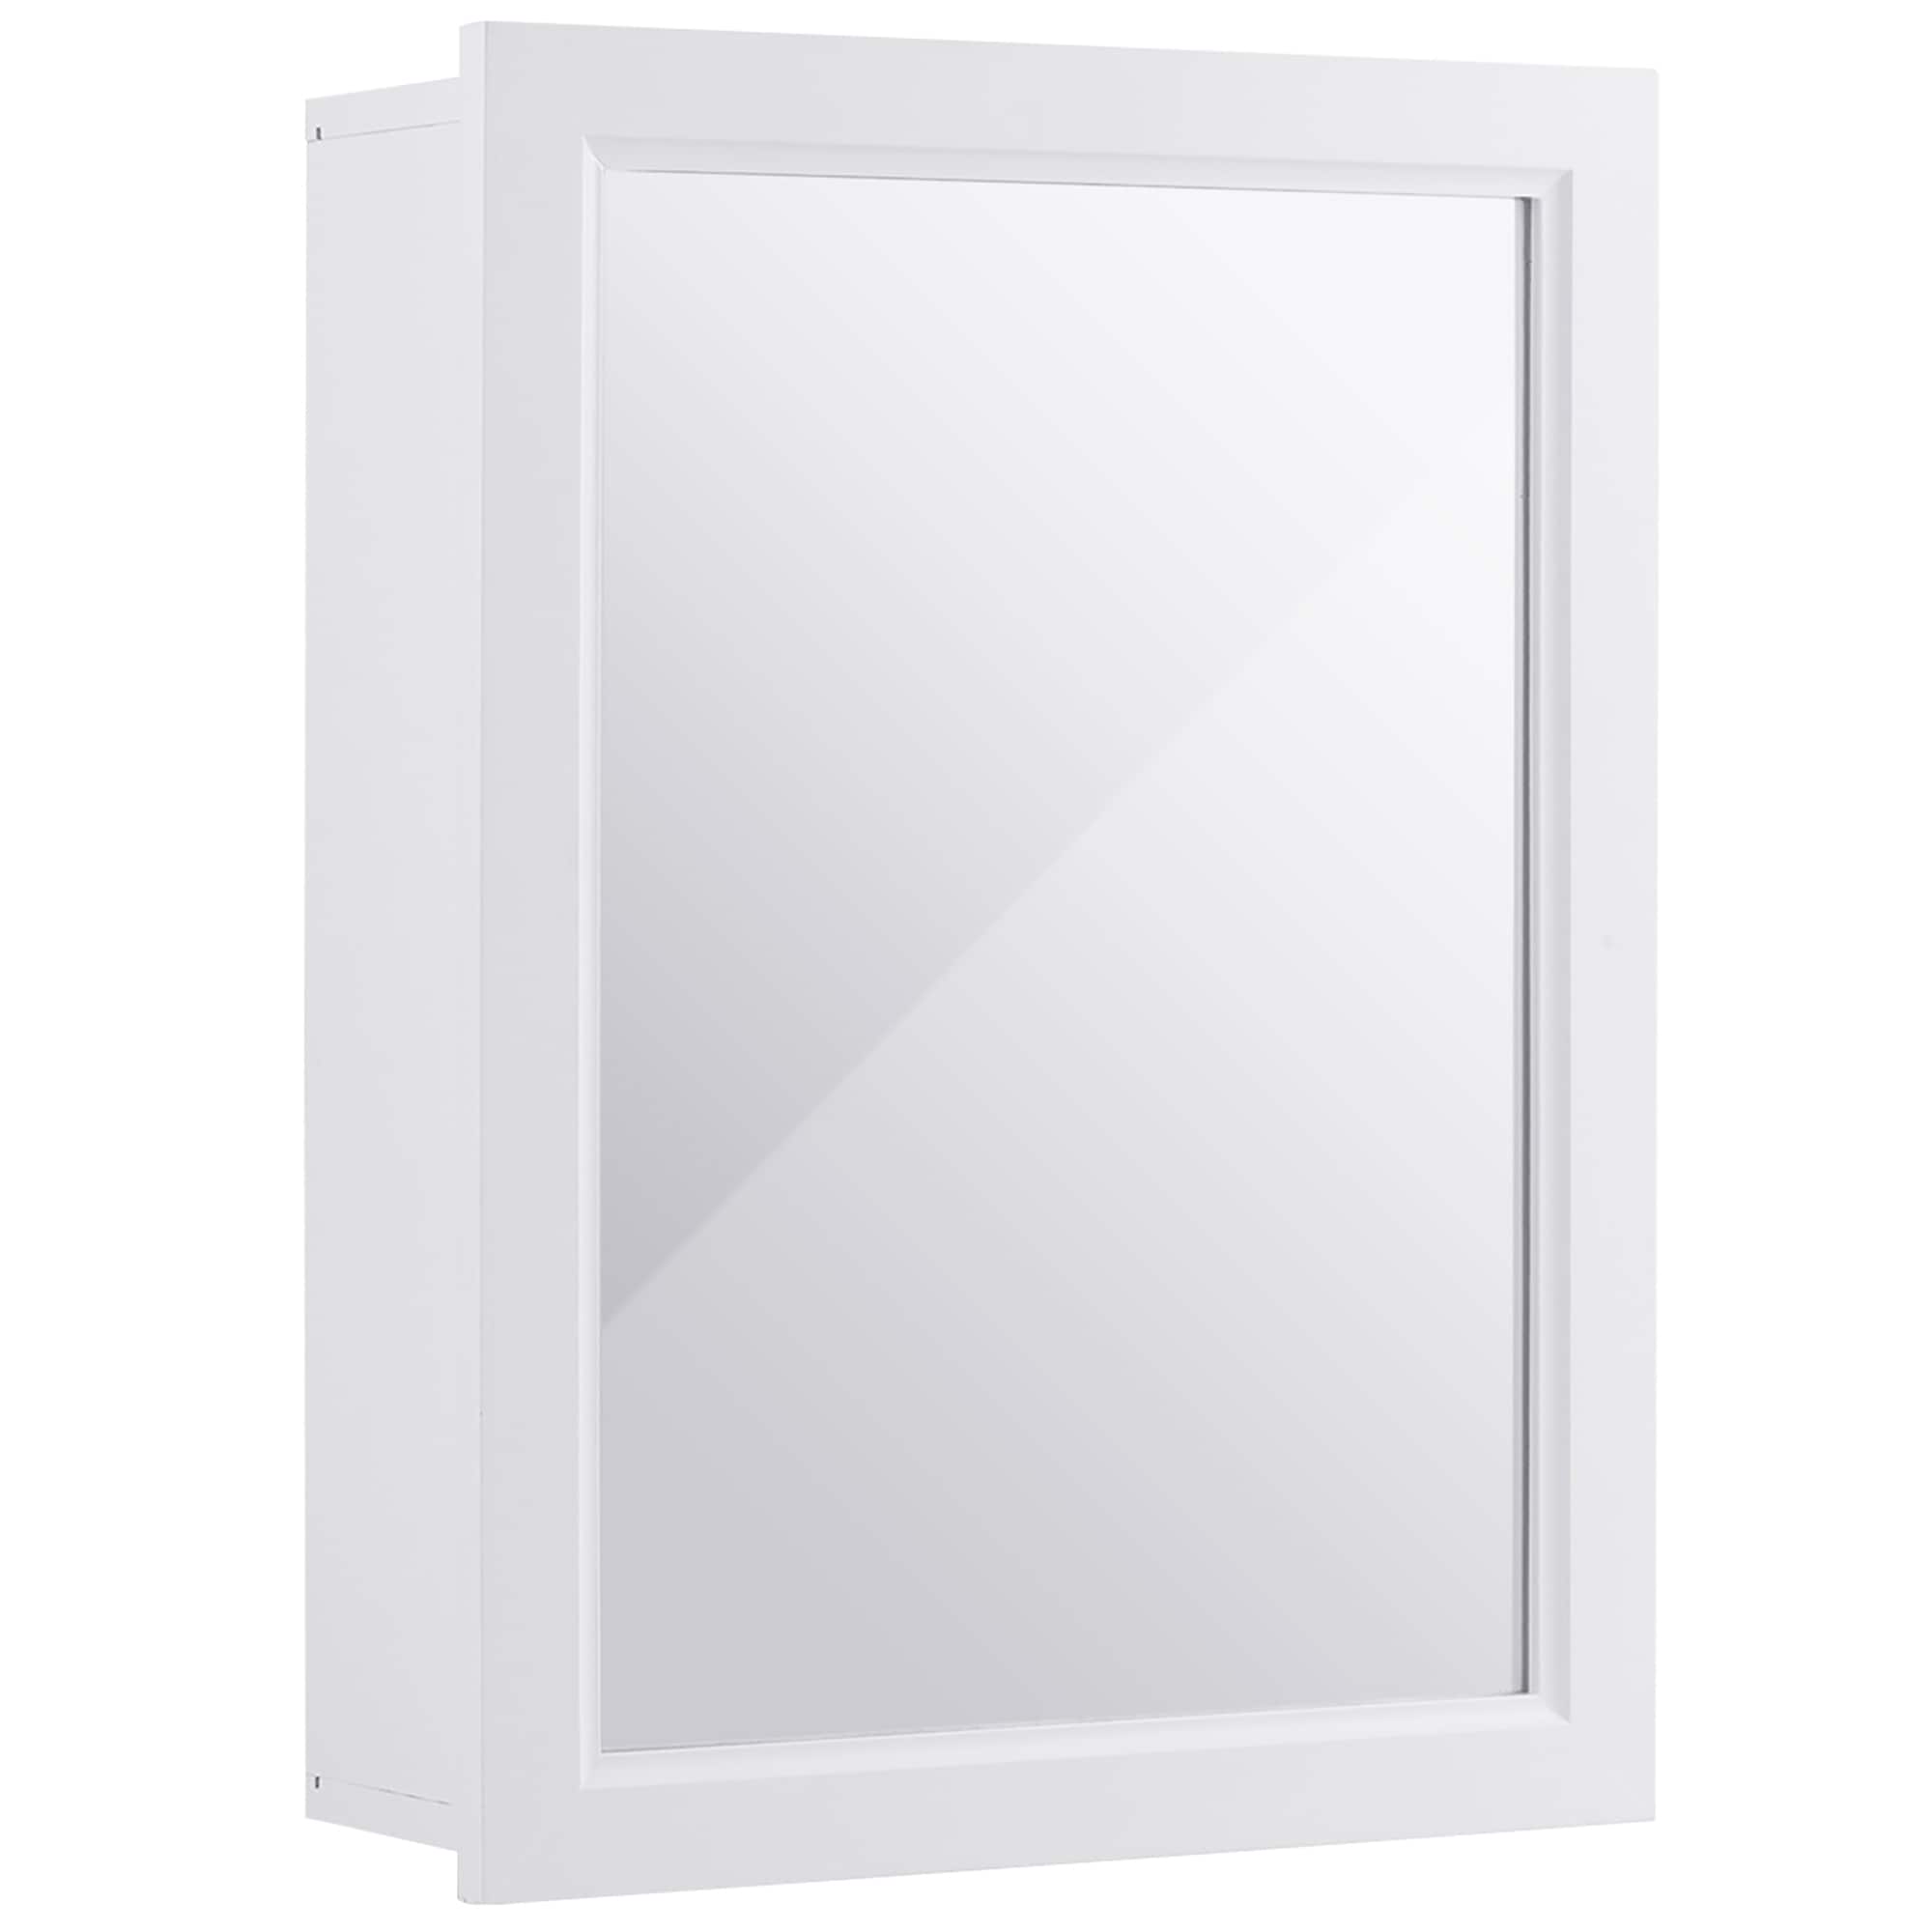 https://ak1.ostkcdn.com/images/products/is/images/direct/21f4b2b960abe1186256f74d1c4659669eaf3600/Bathroom-Cabinet-Mirrored-Wall-Mounted-Storage-Medicine-Cabinet.jpg